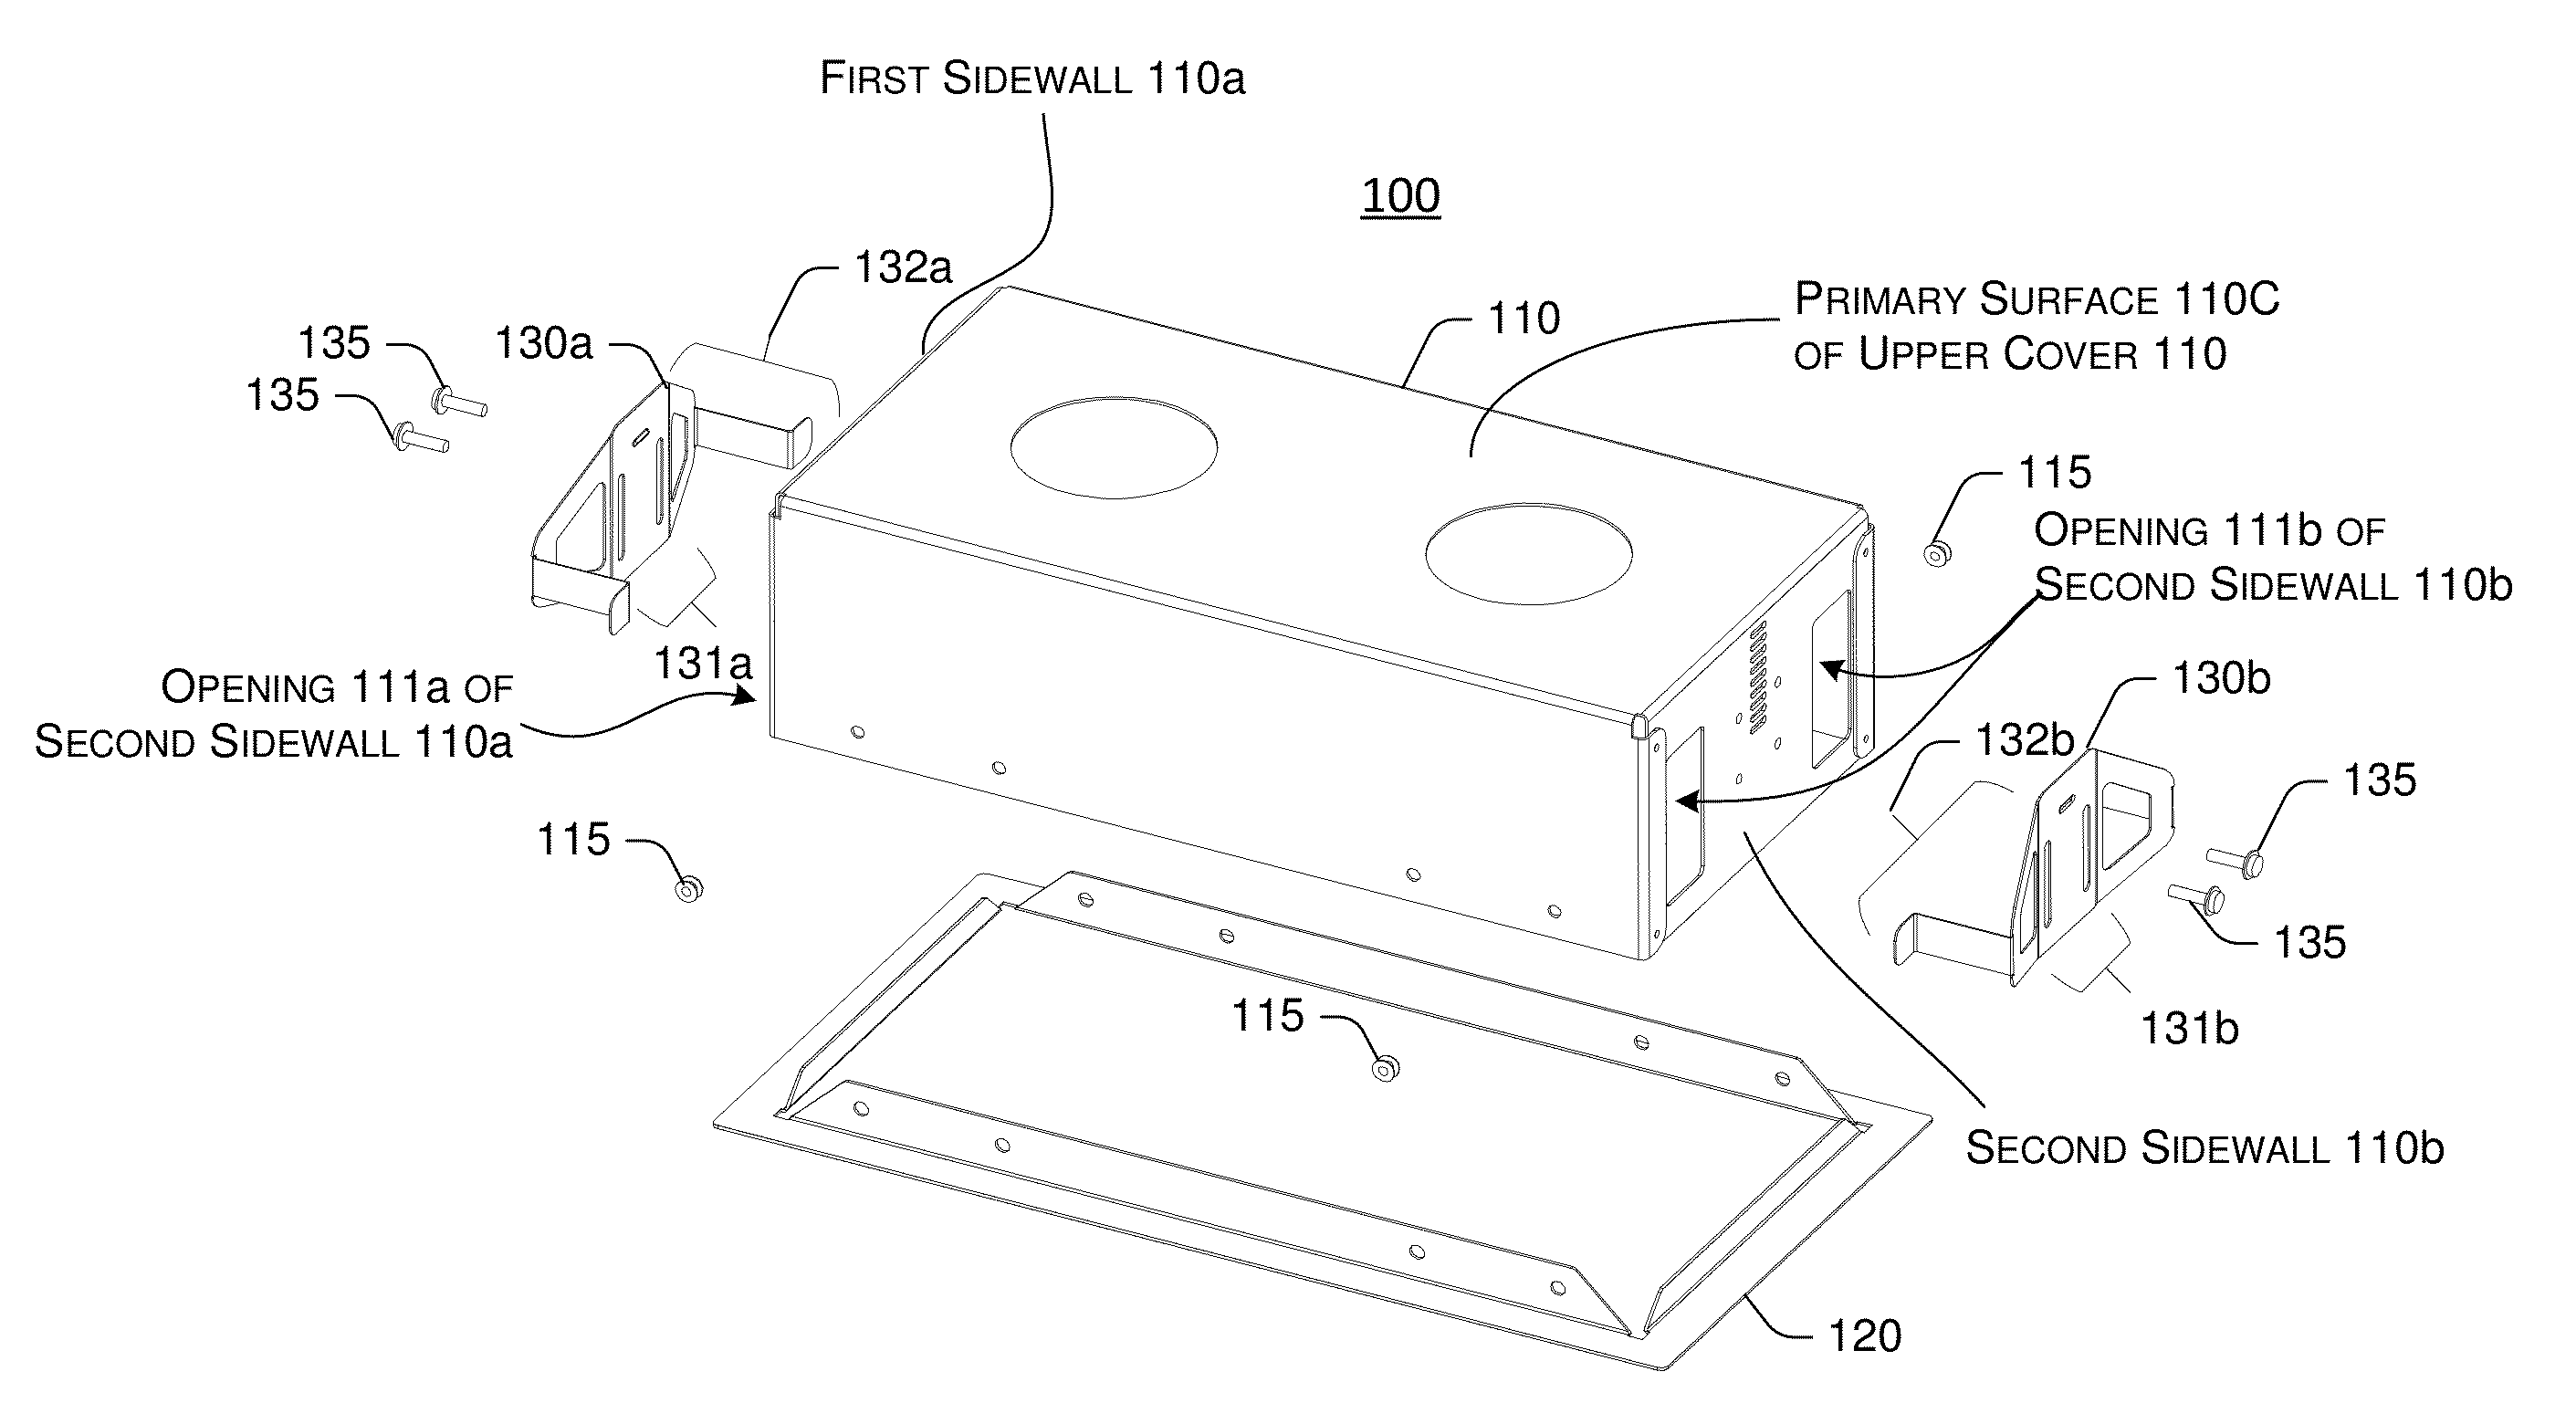 Recessed lamp housing with adjustable spring clipping device